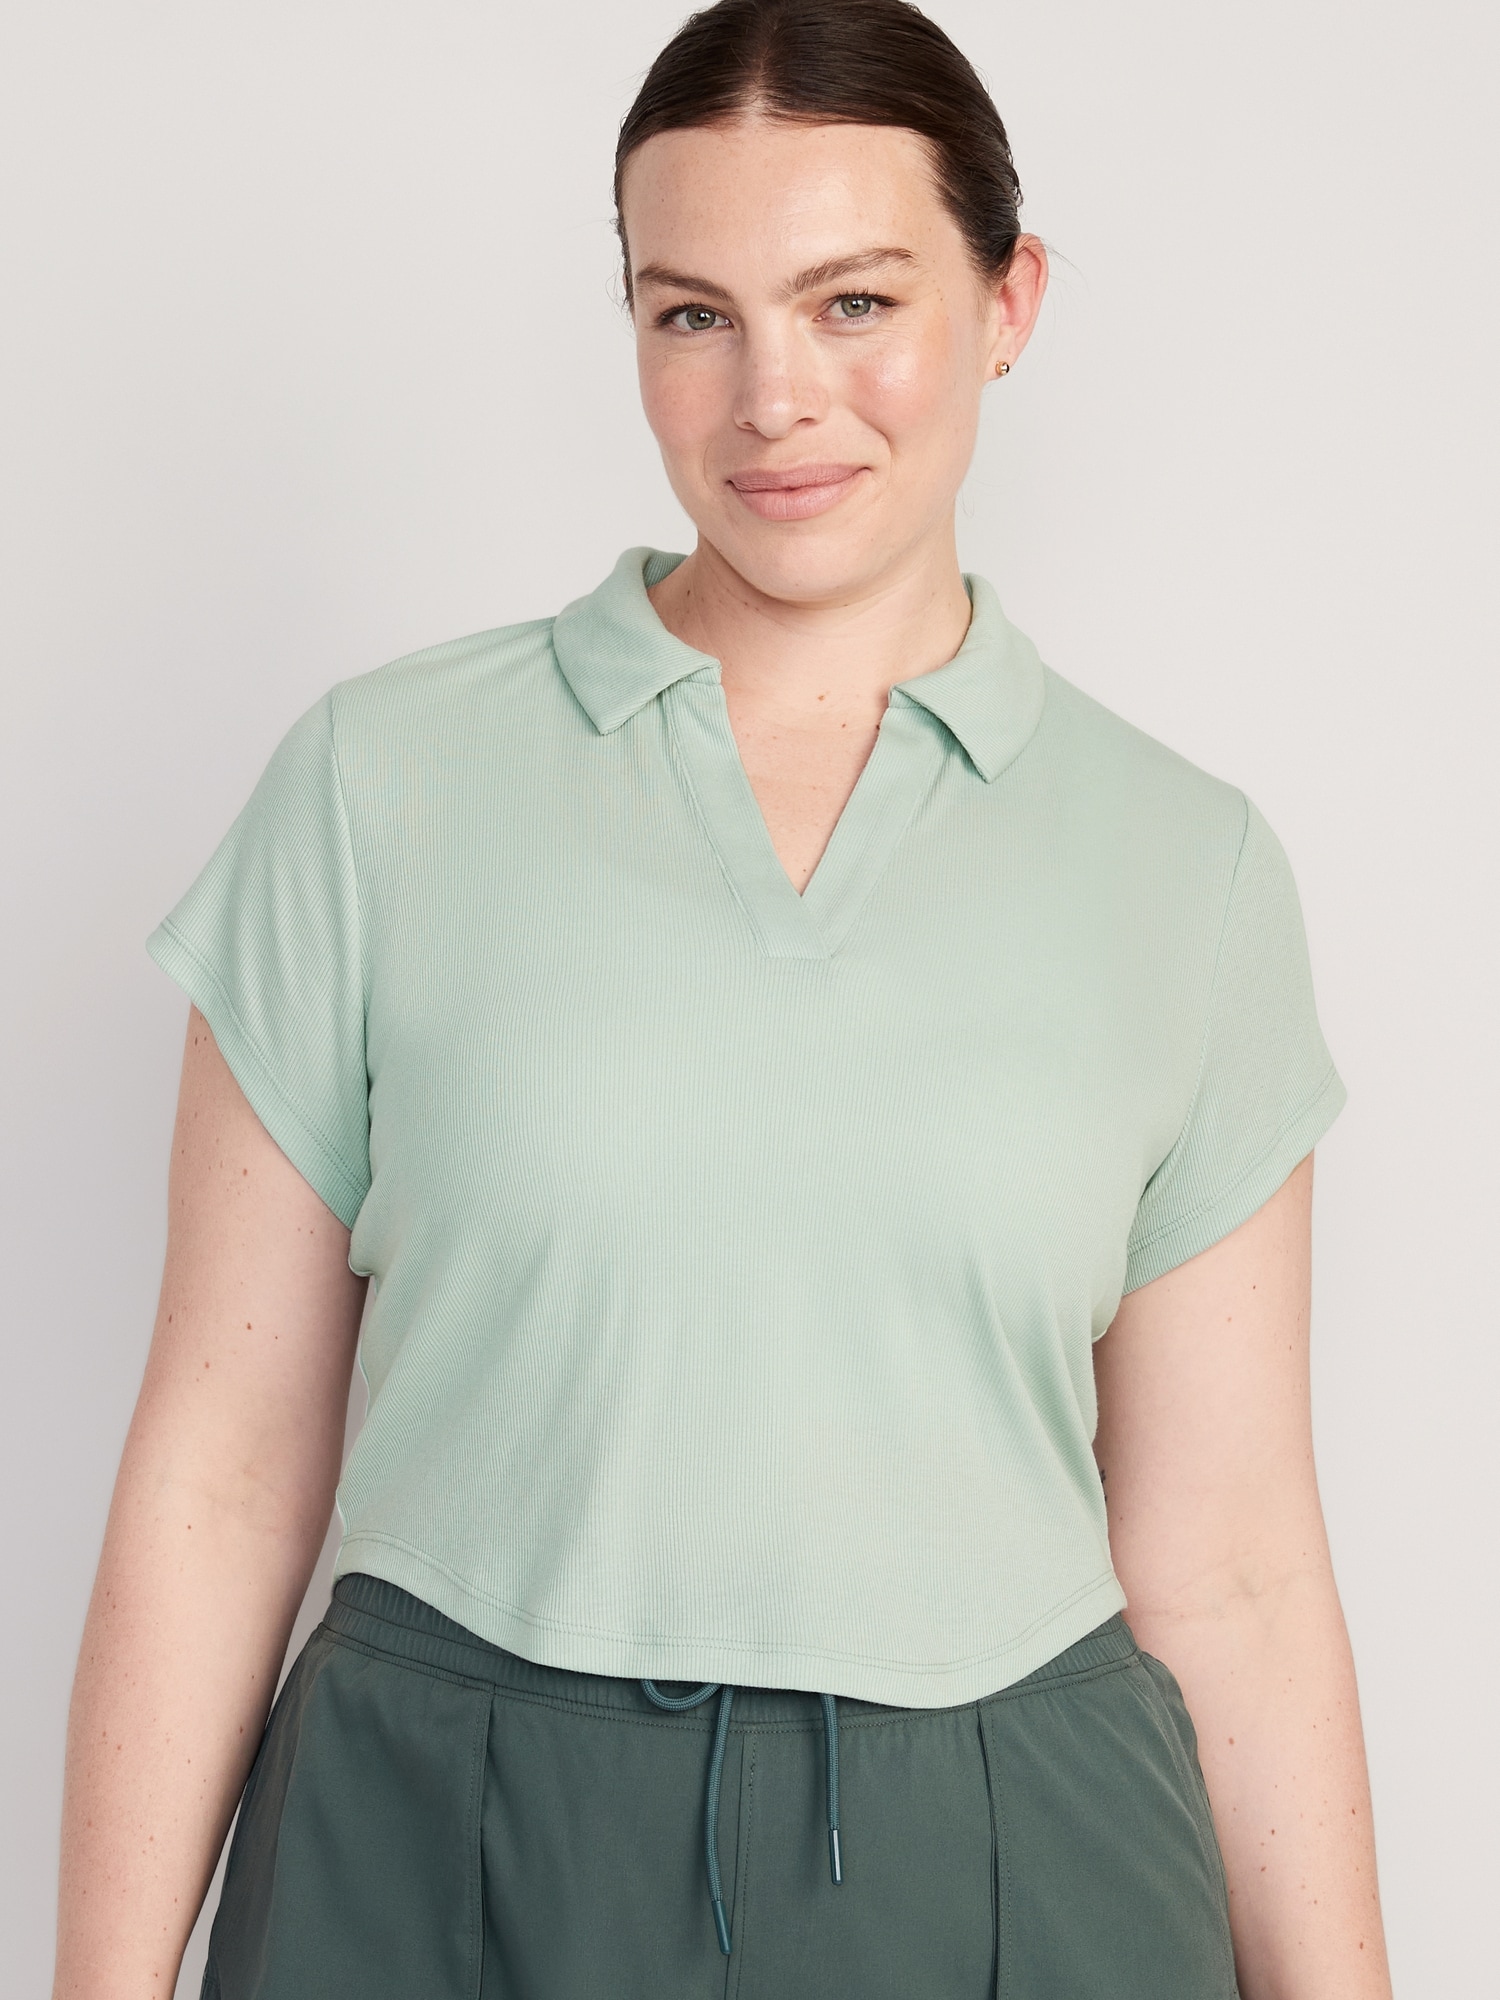 UltraLite Rib-Knit Cropped Polo Shirt for Women | Old Navy